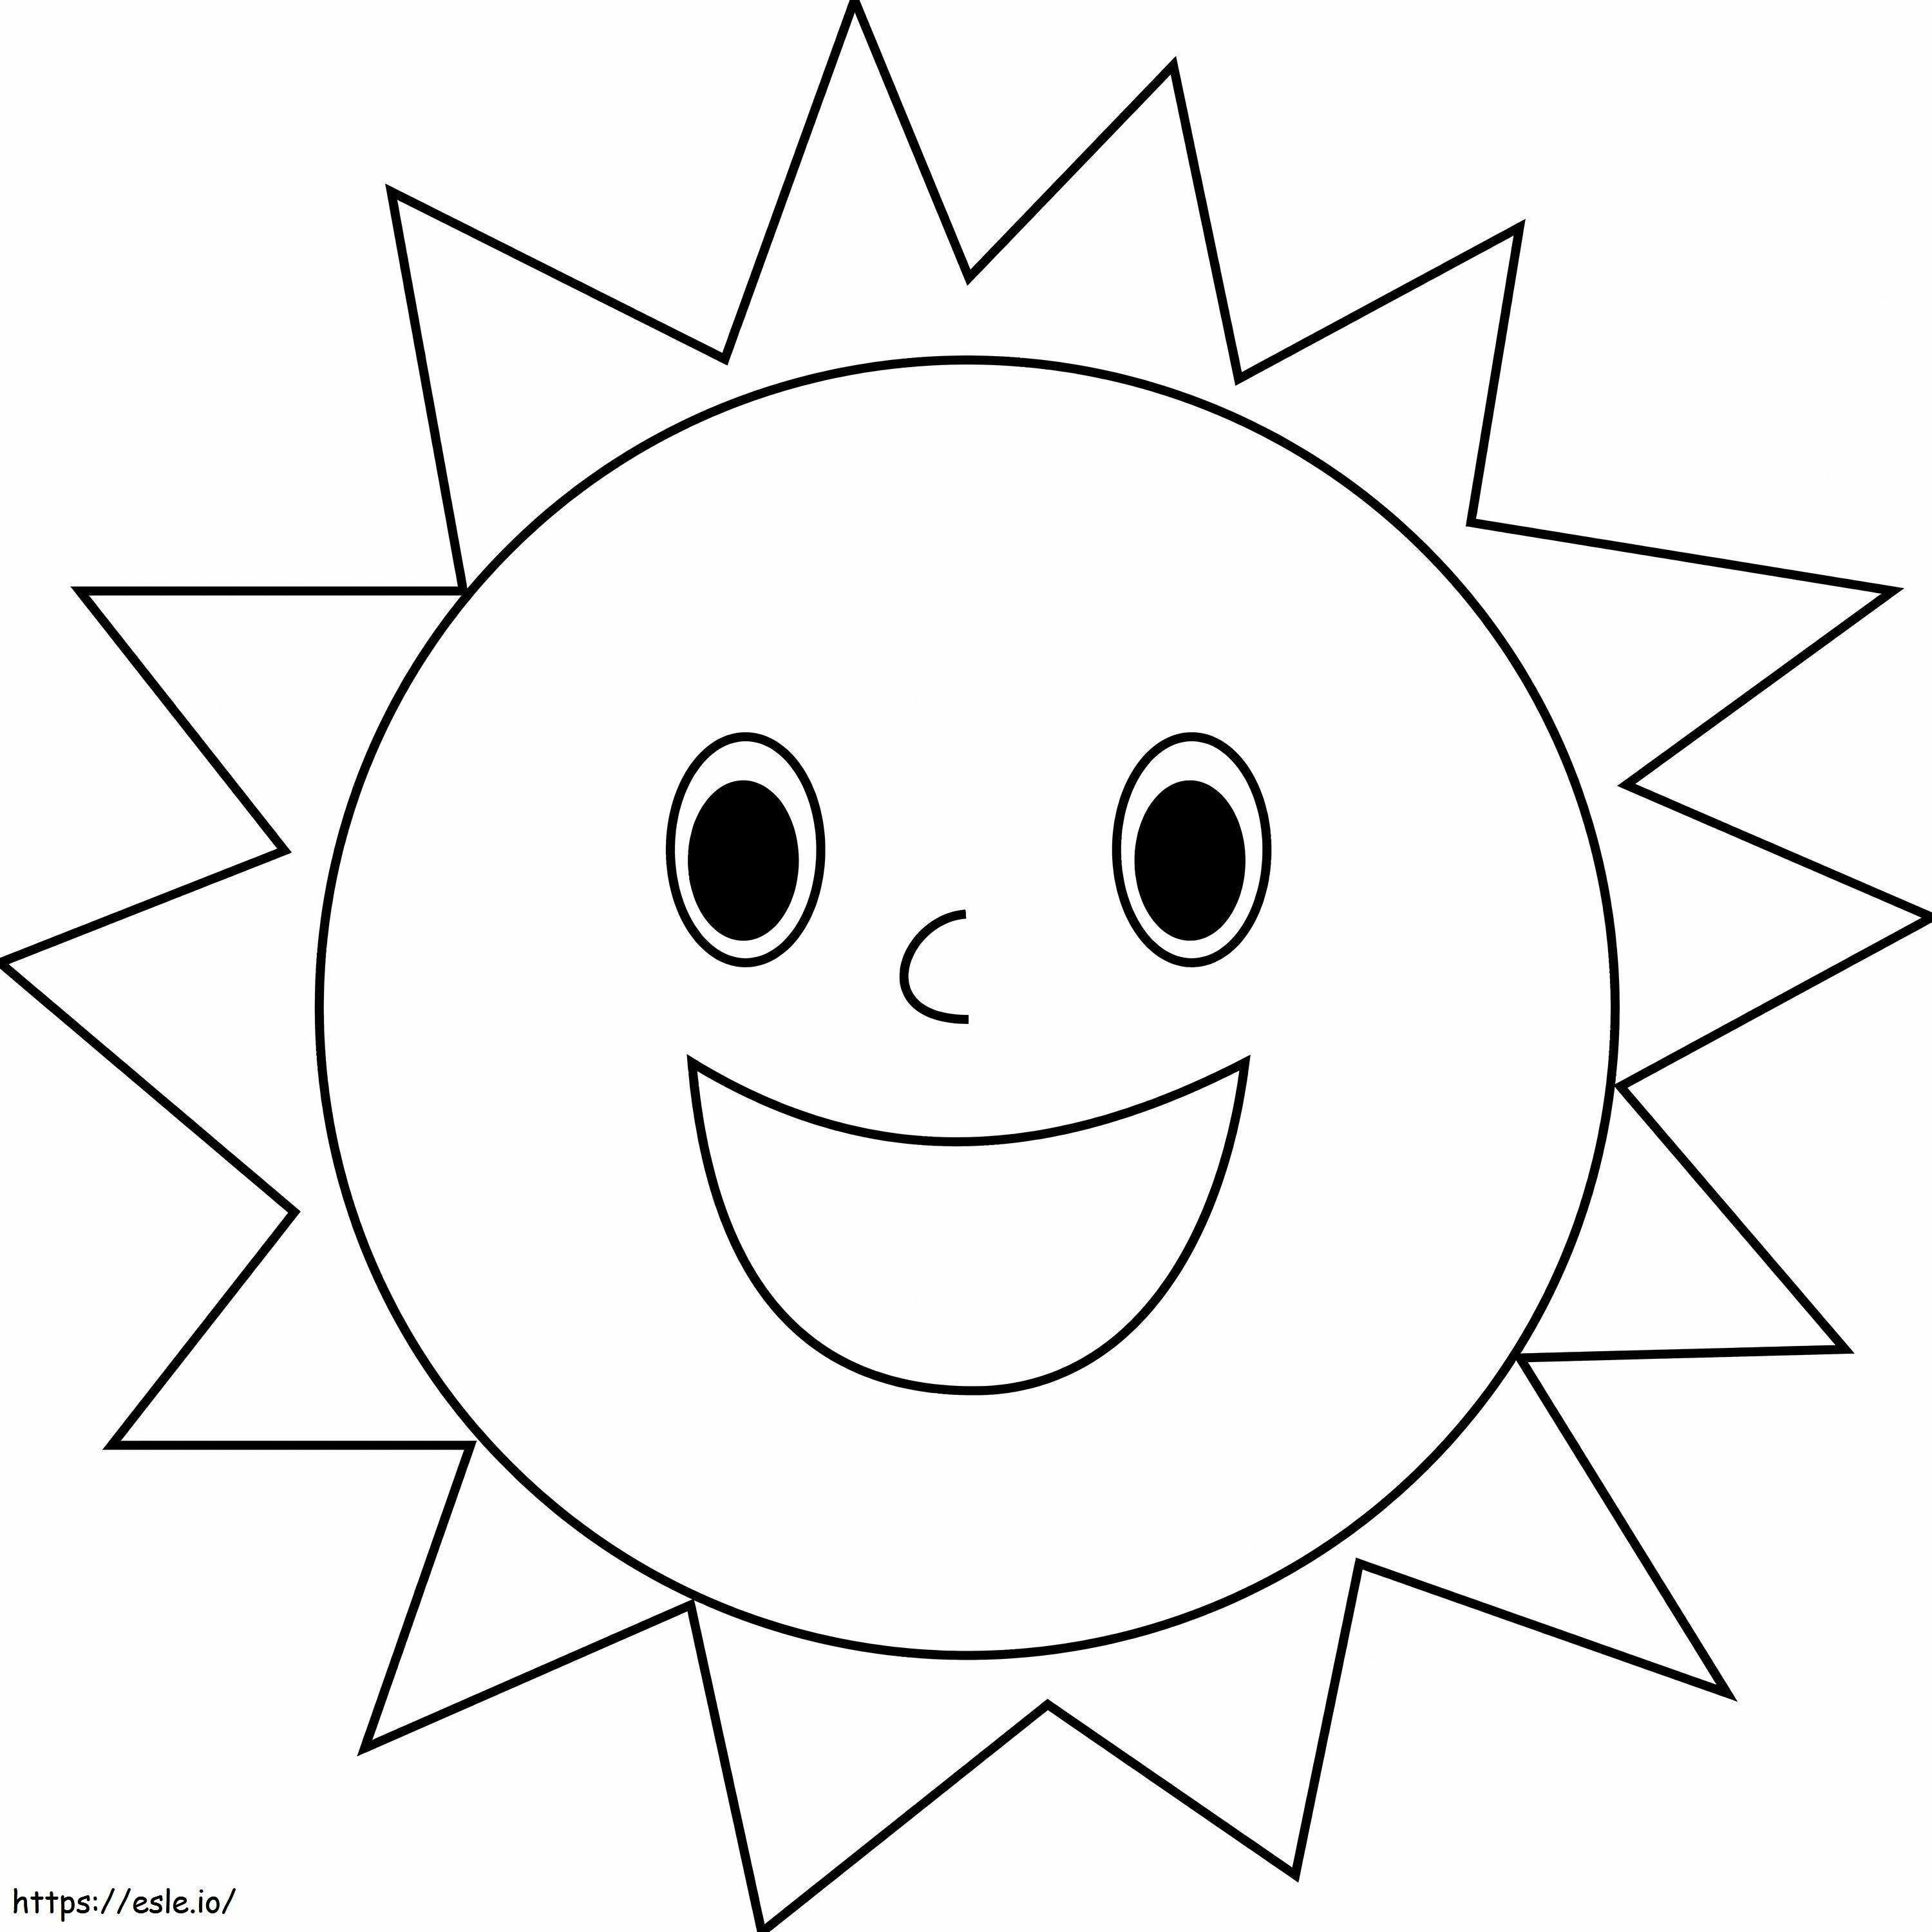 Sun Smiling coloring page